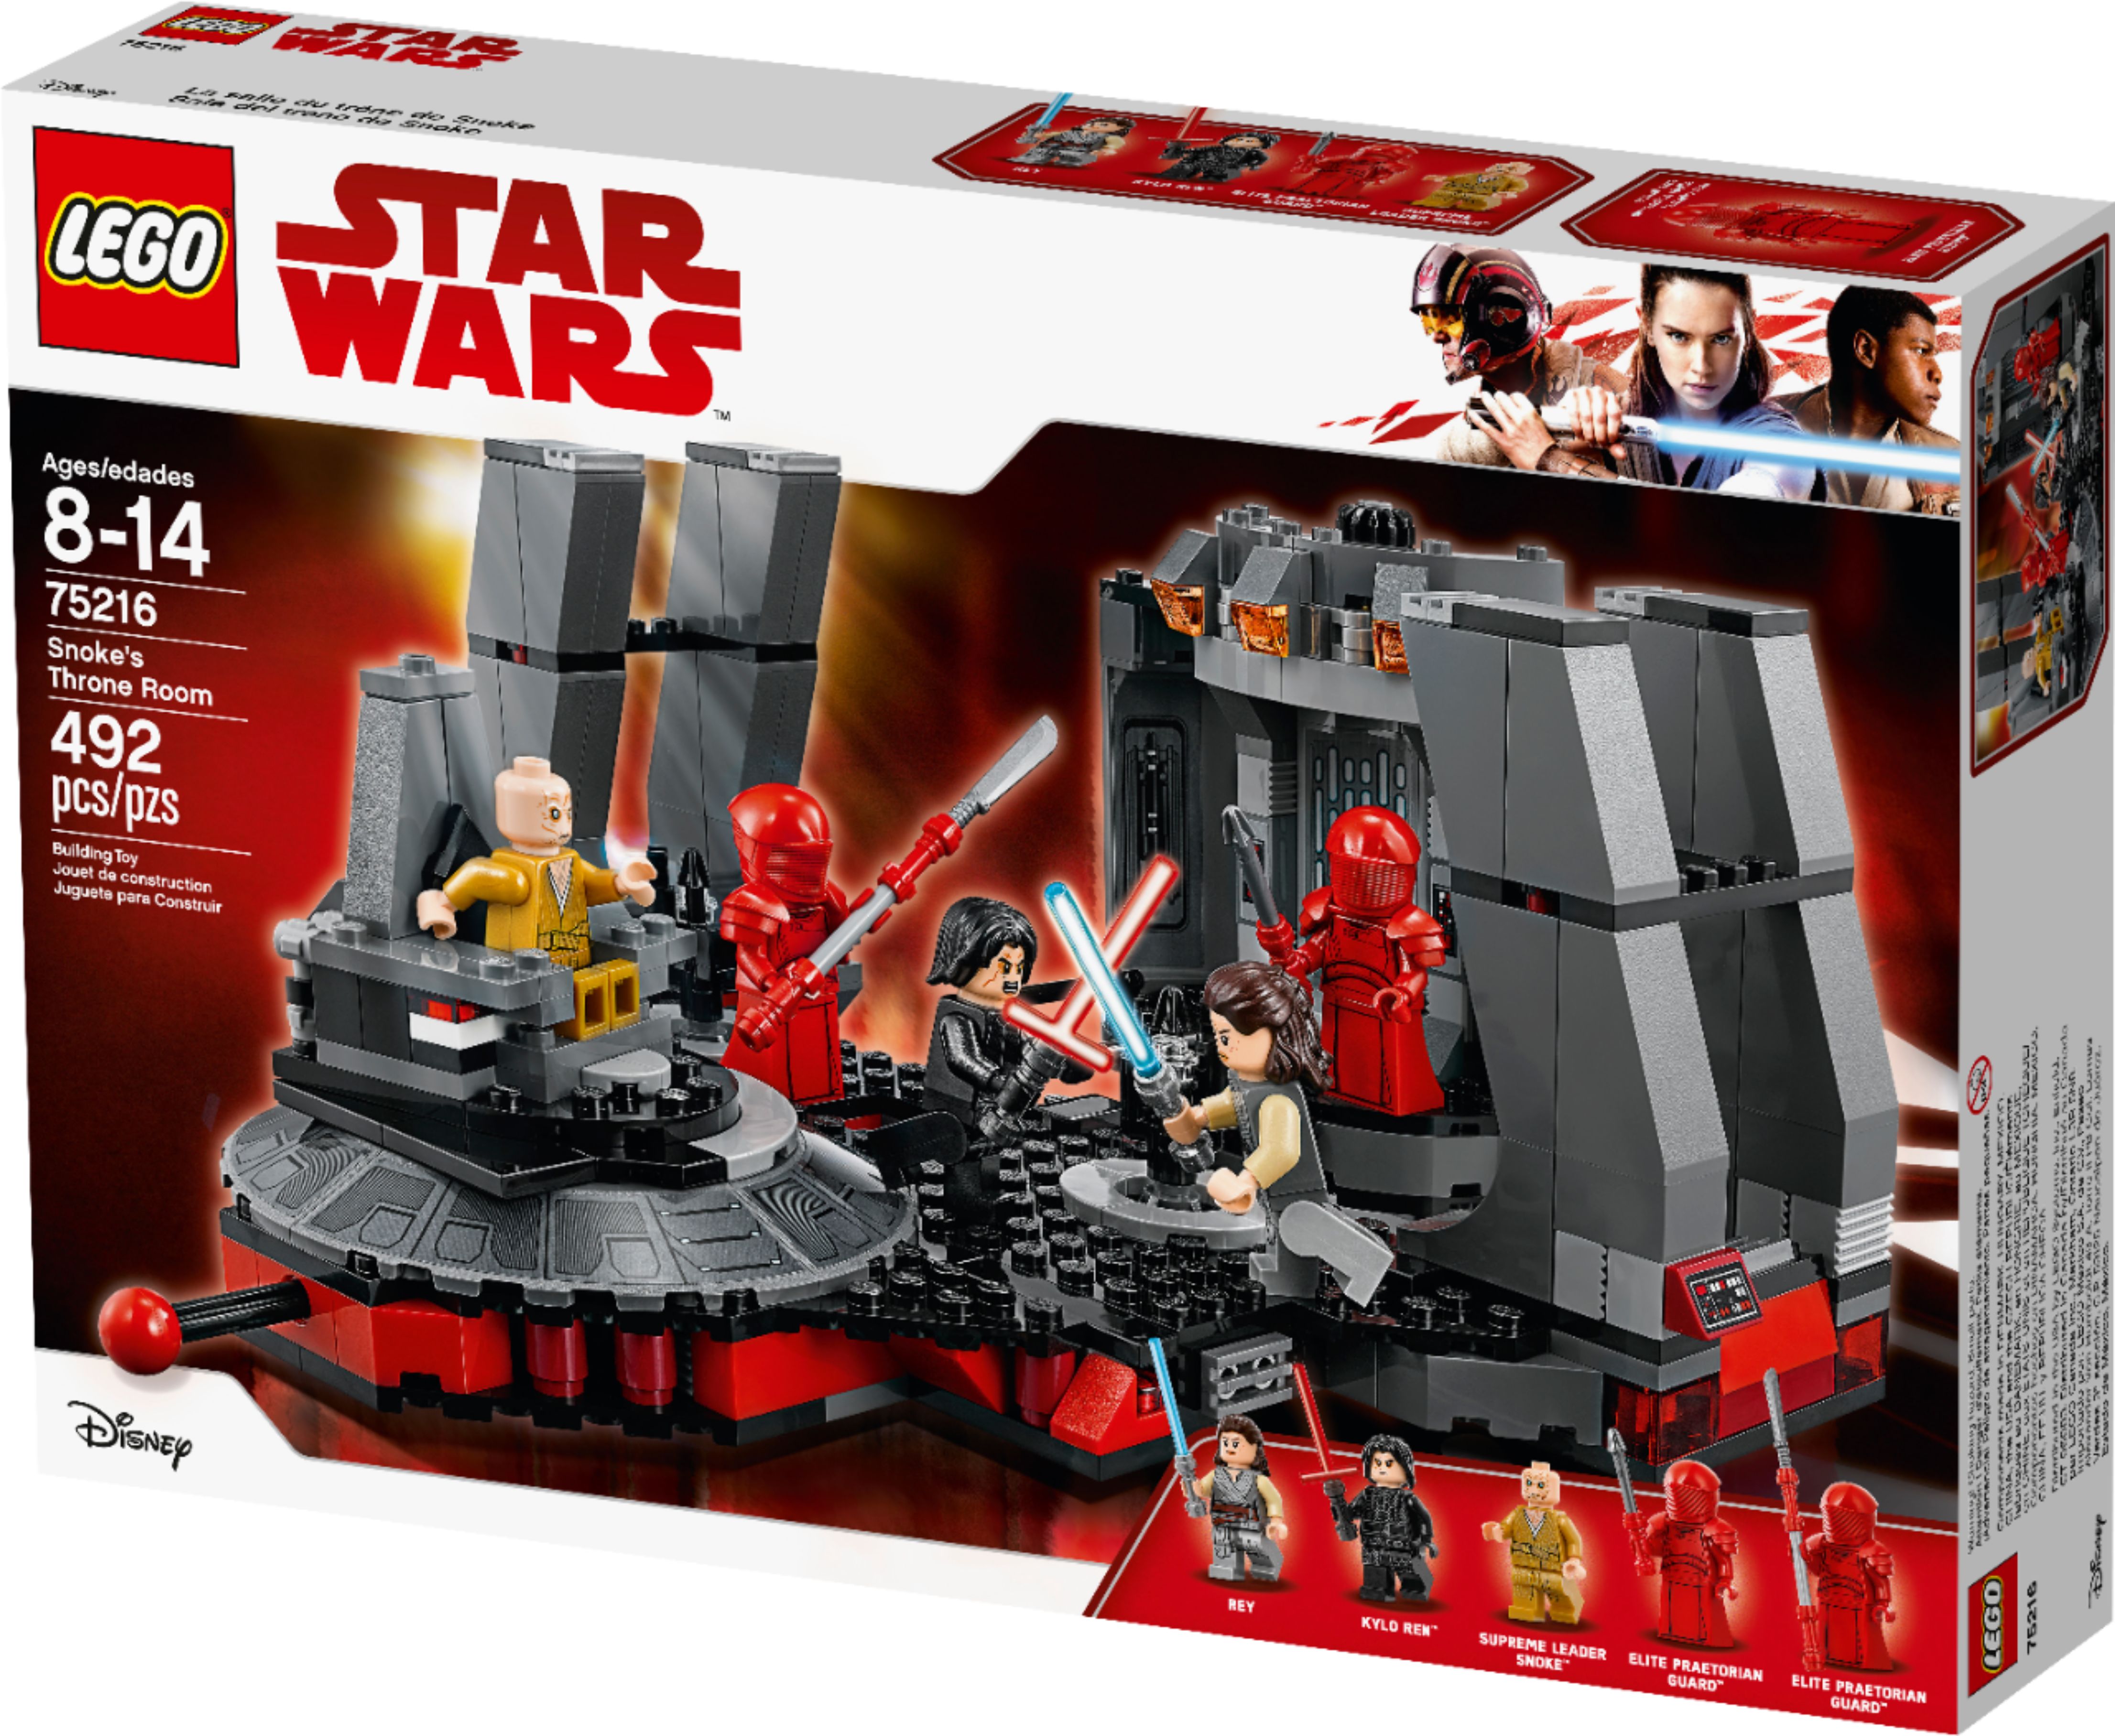 Rey, Poe, Snoke, And Hux Featured In Star Wars: The Last Jedi LEGO Sets